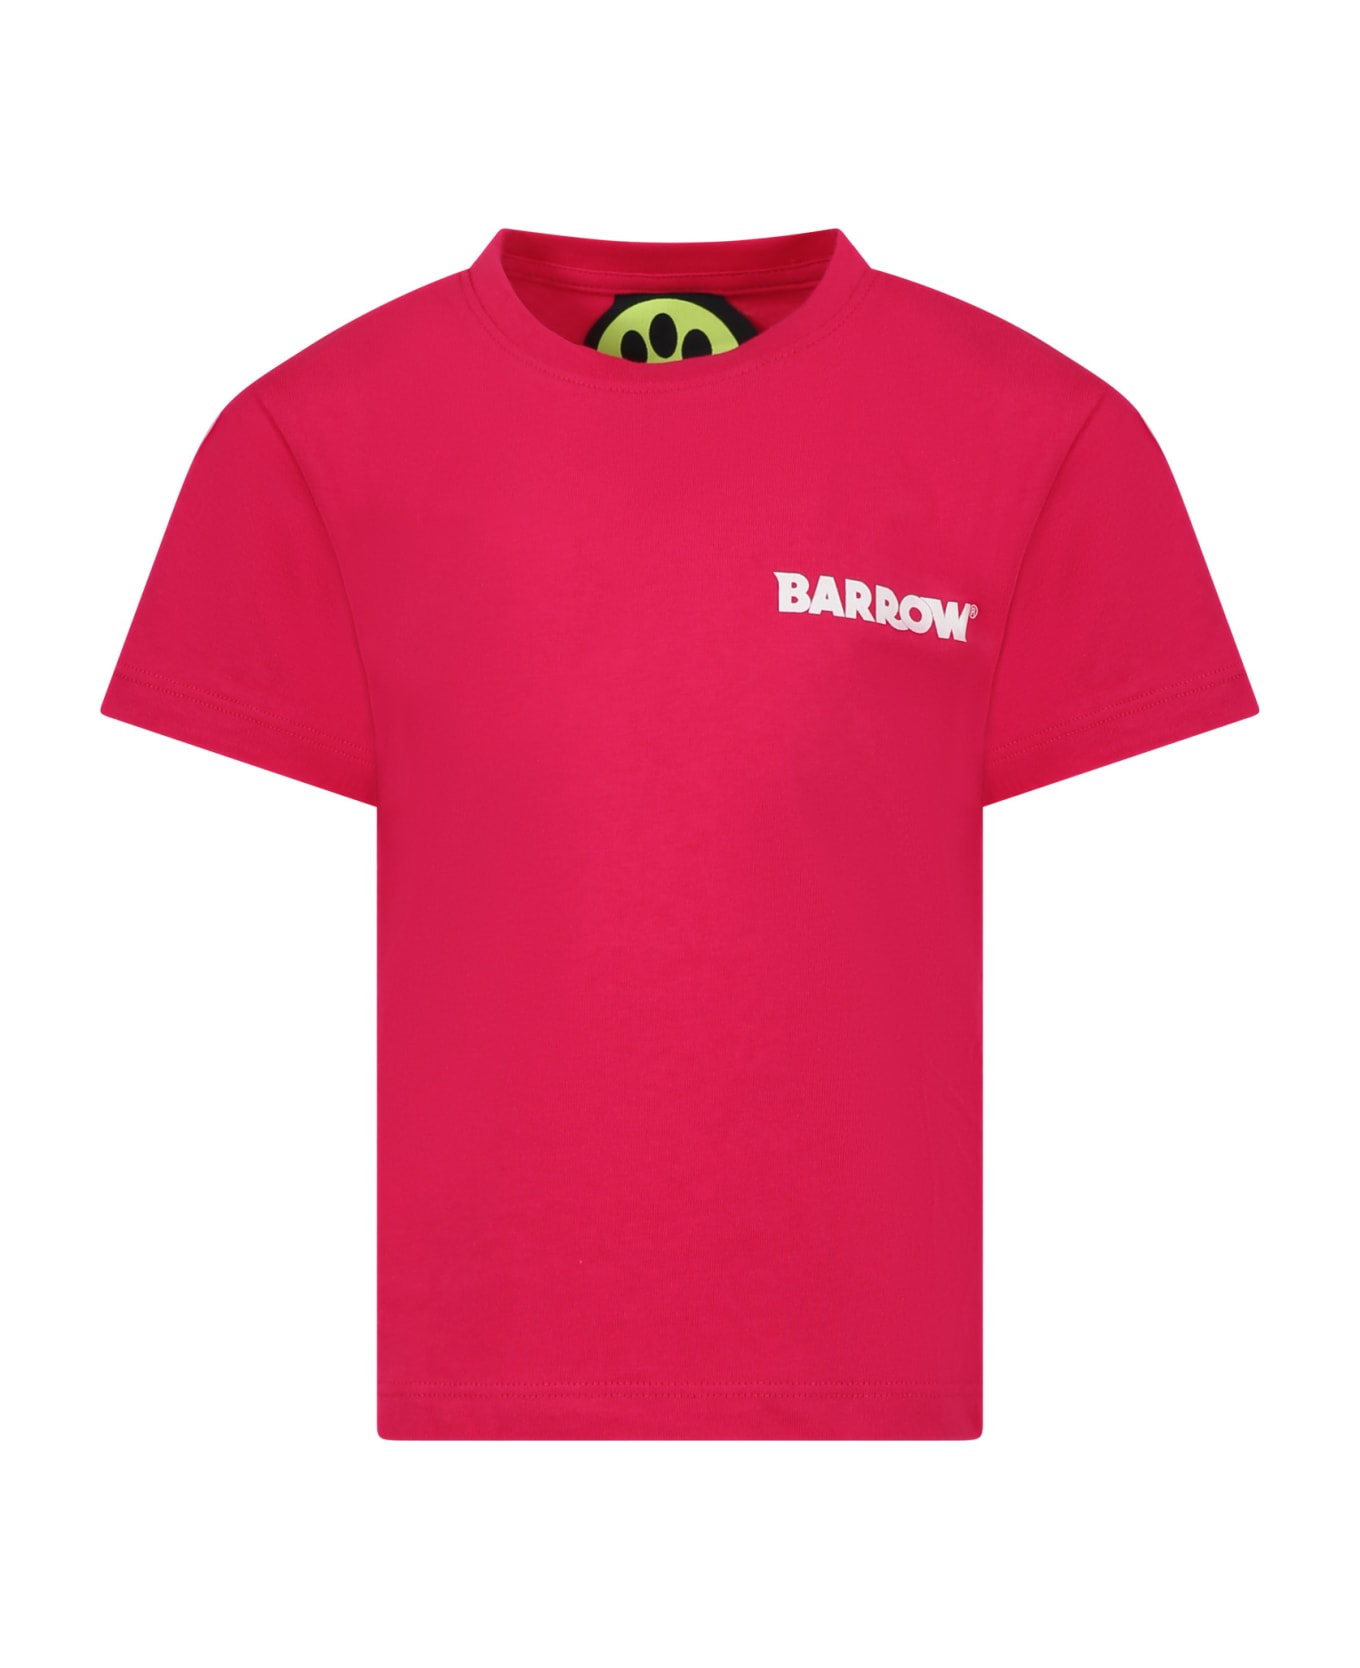 Barrow Fuchsia T-shirt For Kids With Smiley Face And Logo - Fragola